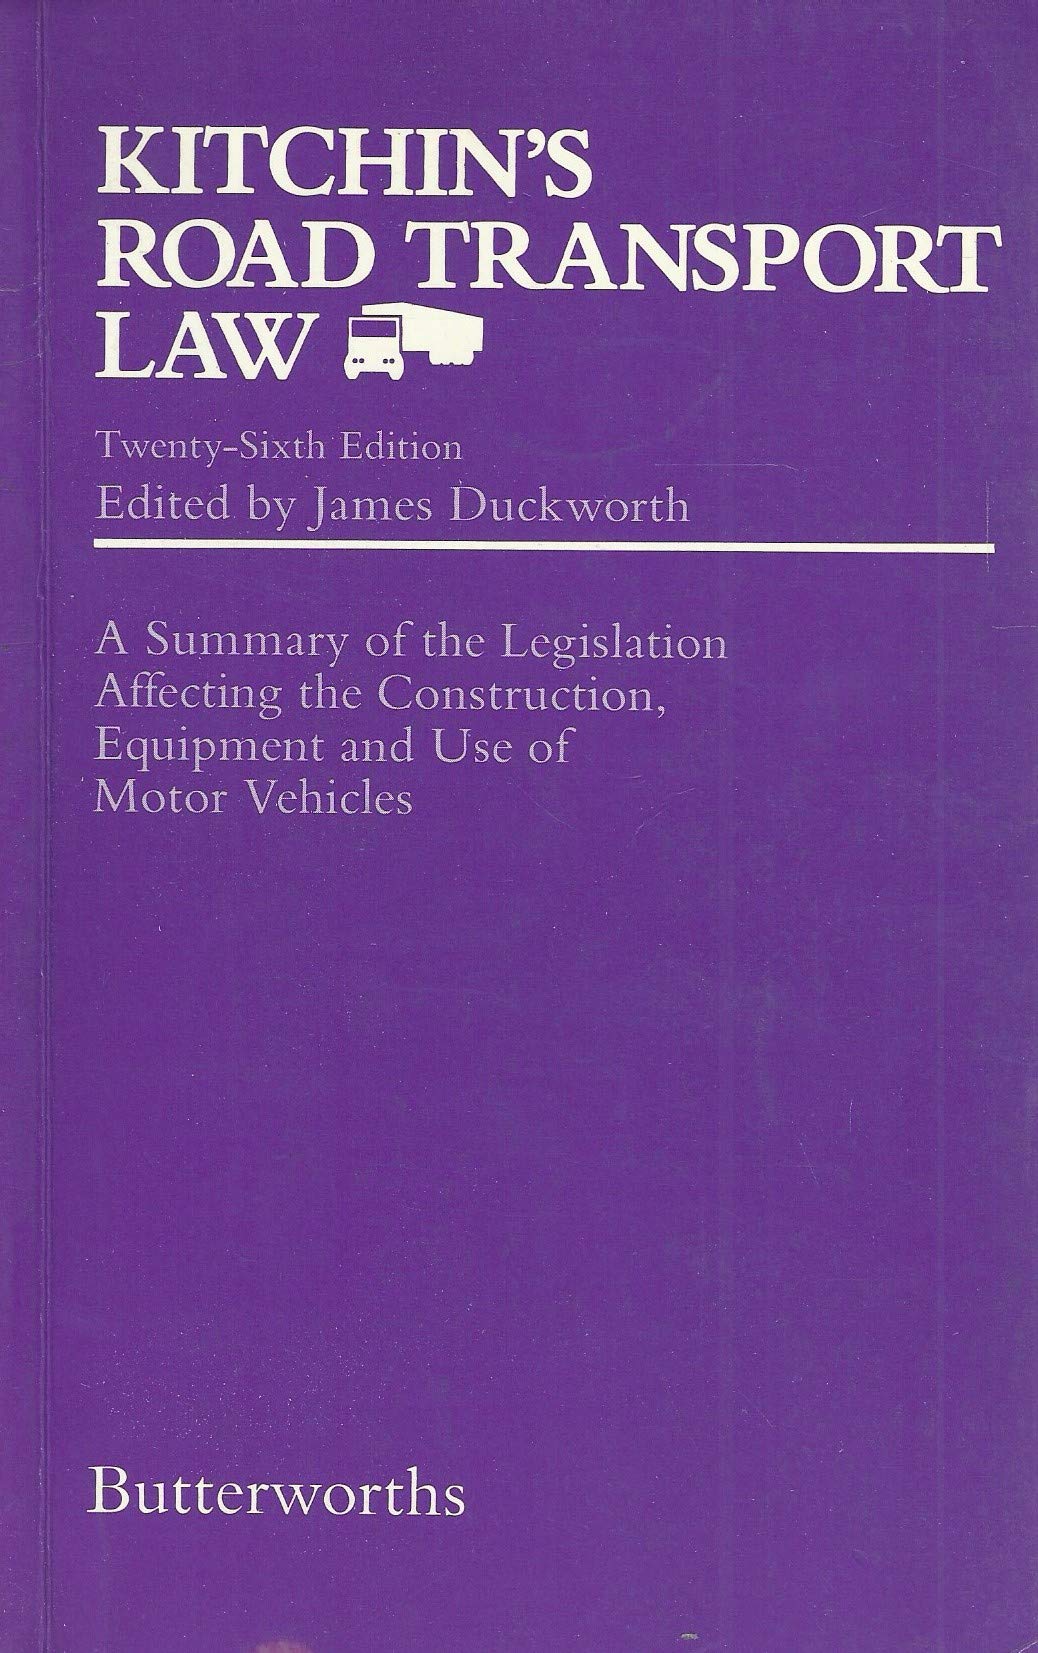 Kitchin's Road Transport Law: A Summary of the Legislation Affecting the Construction, Equipment and Use of Motor Vehicles